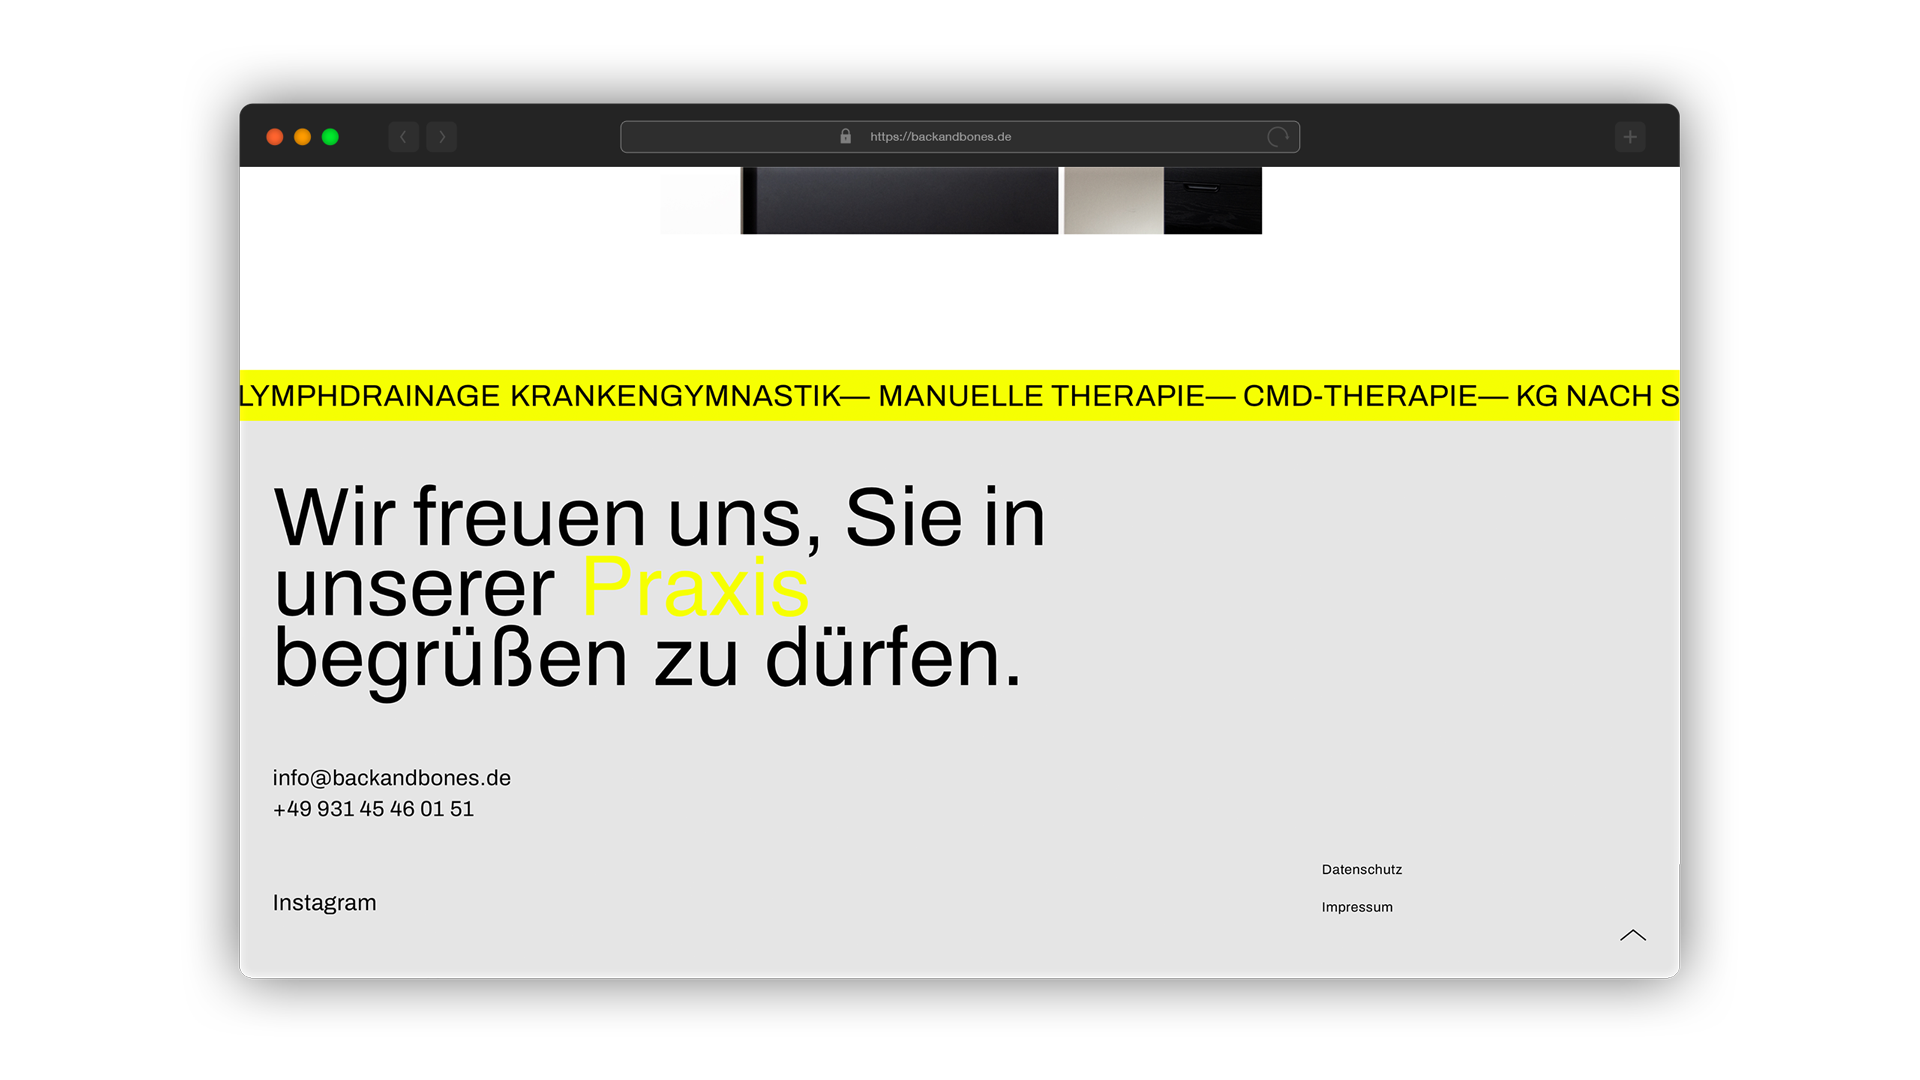 Back and bones Physiotherapie Würzburg, Website Design, Footer